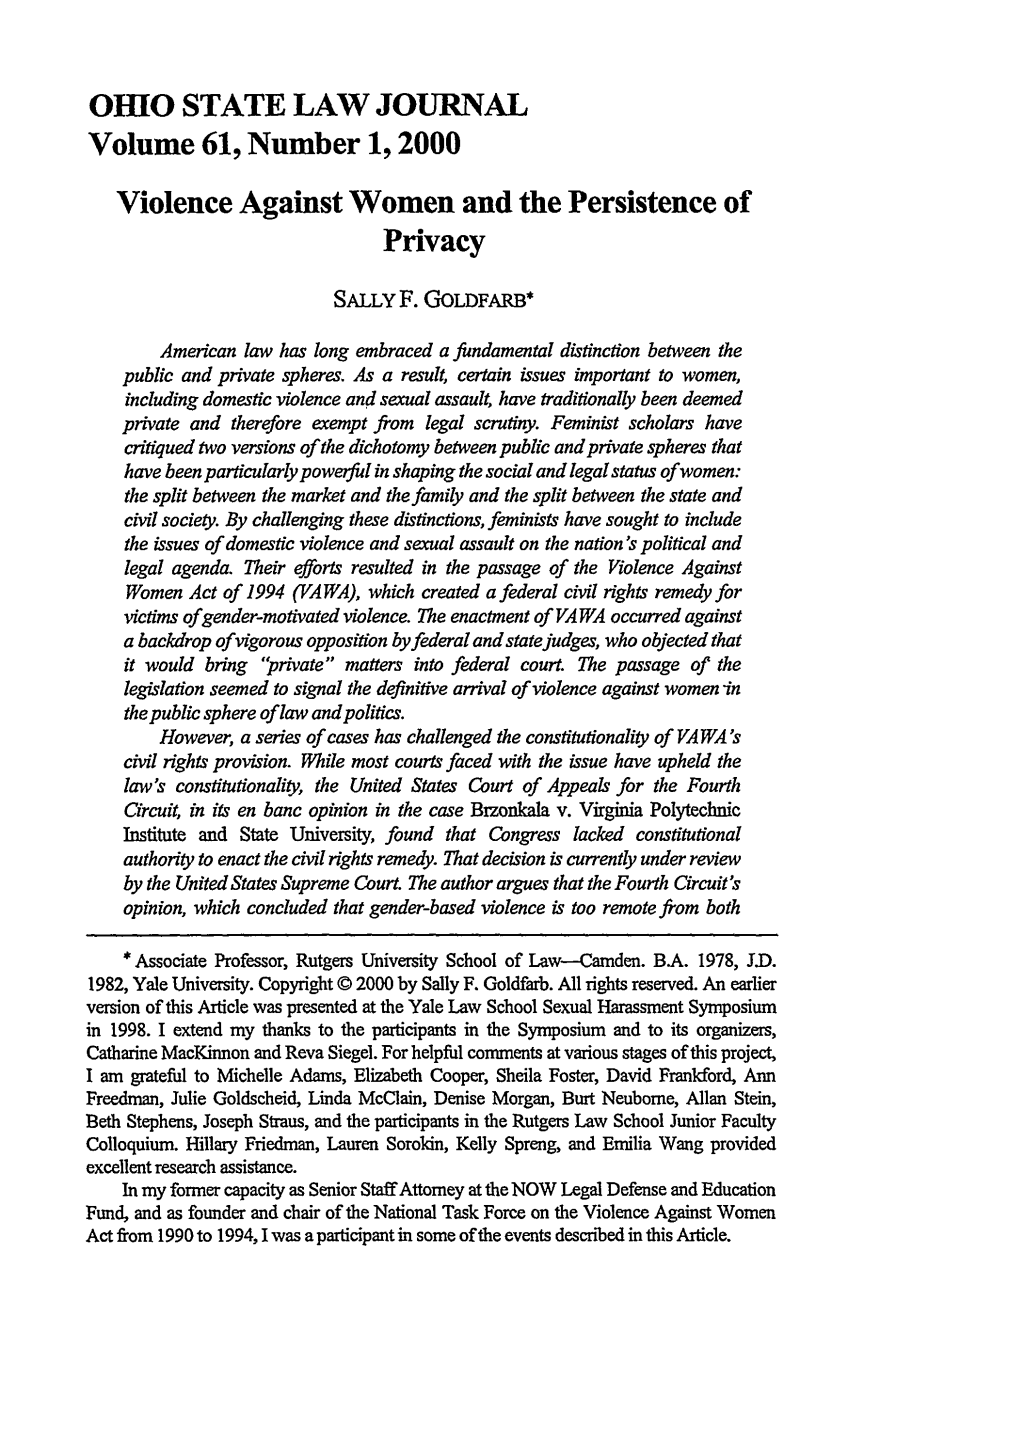 Violence Against Women and the Persistence of Privacy